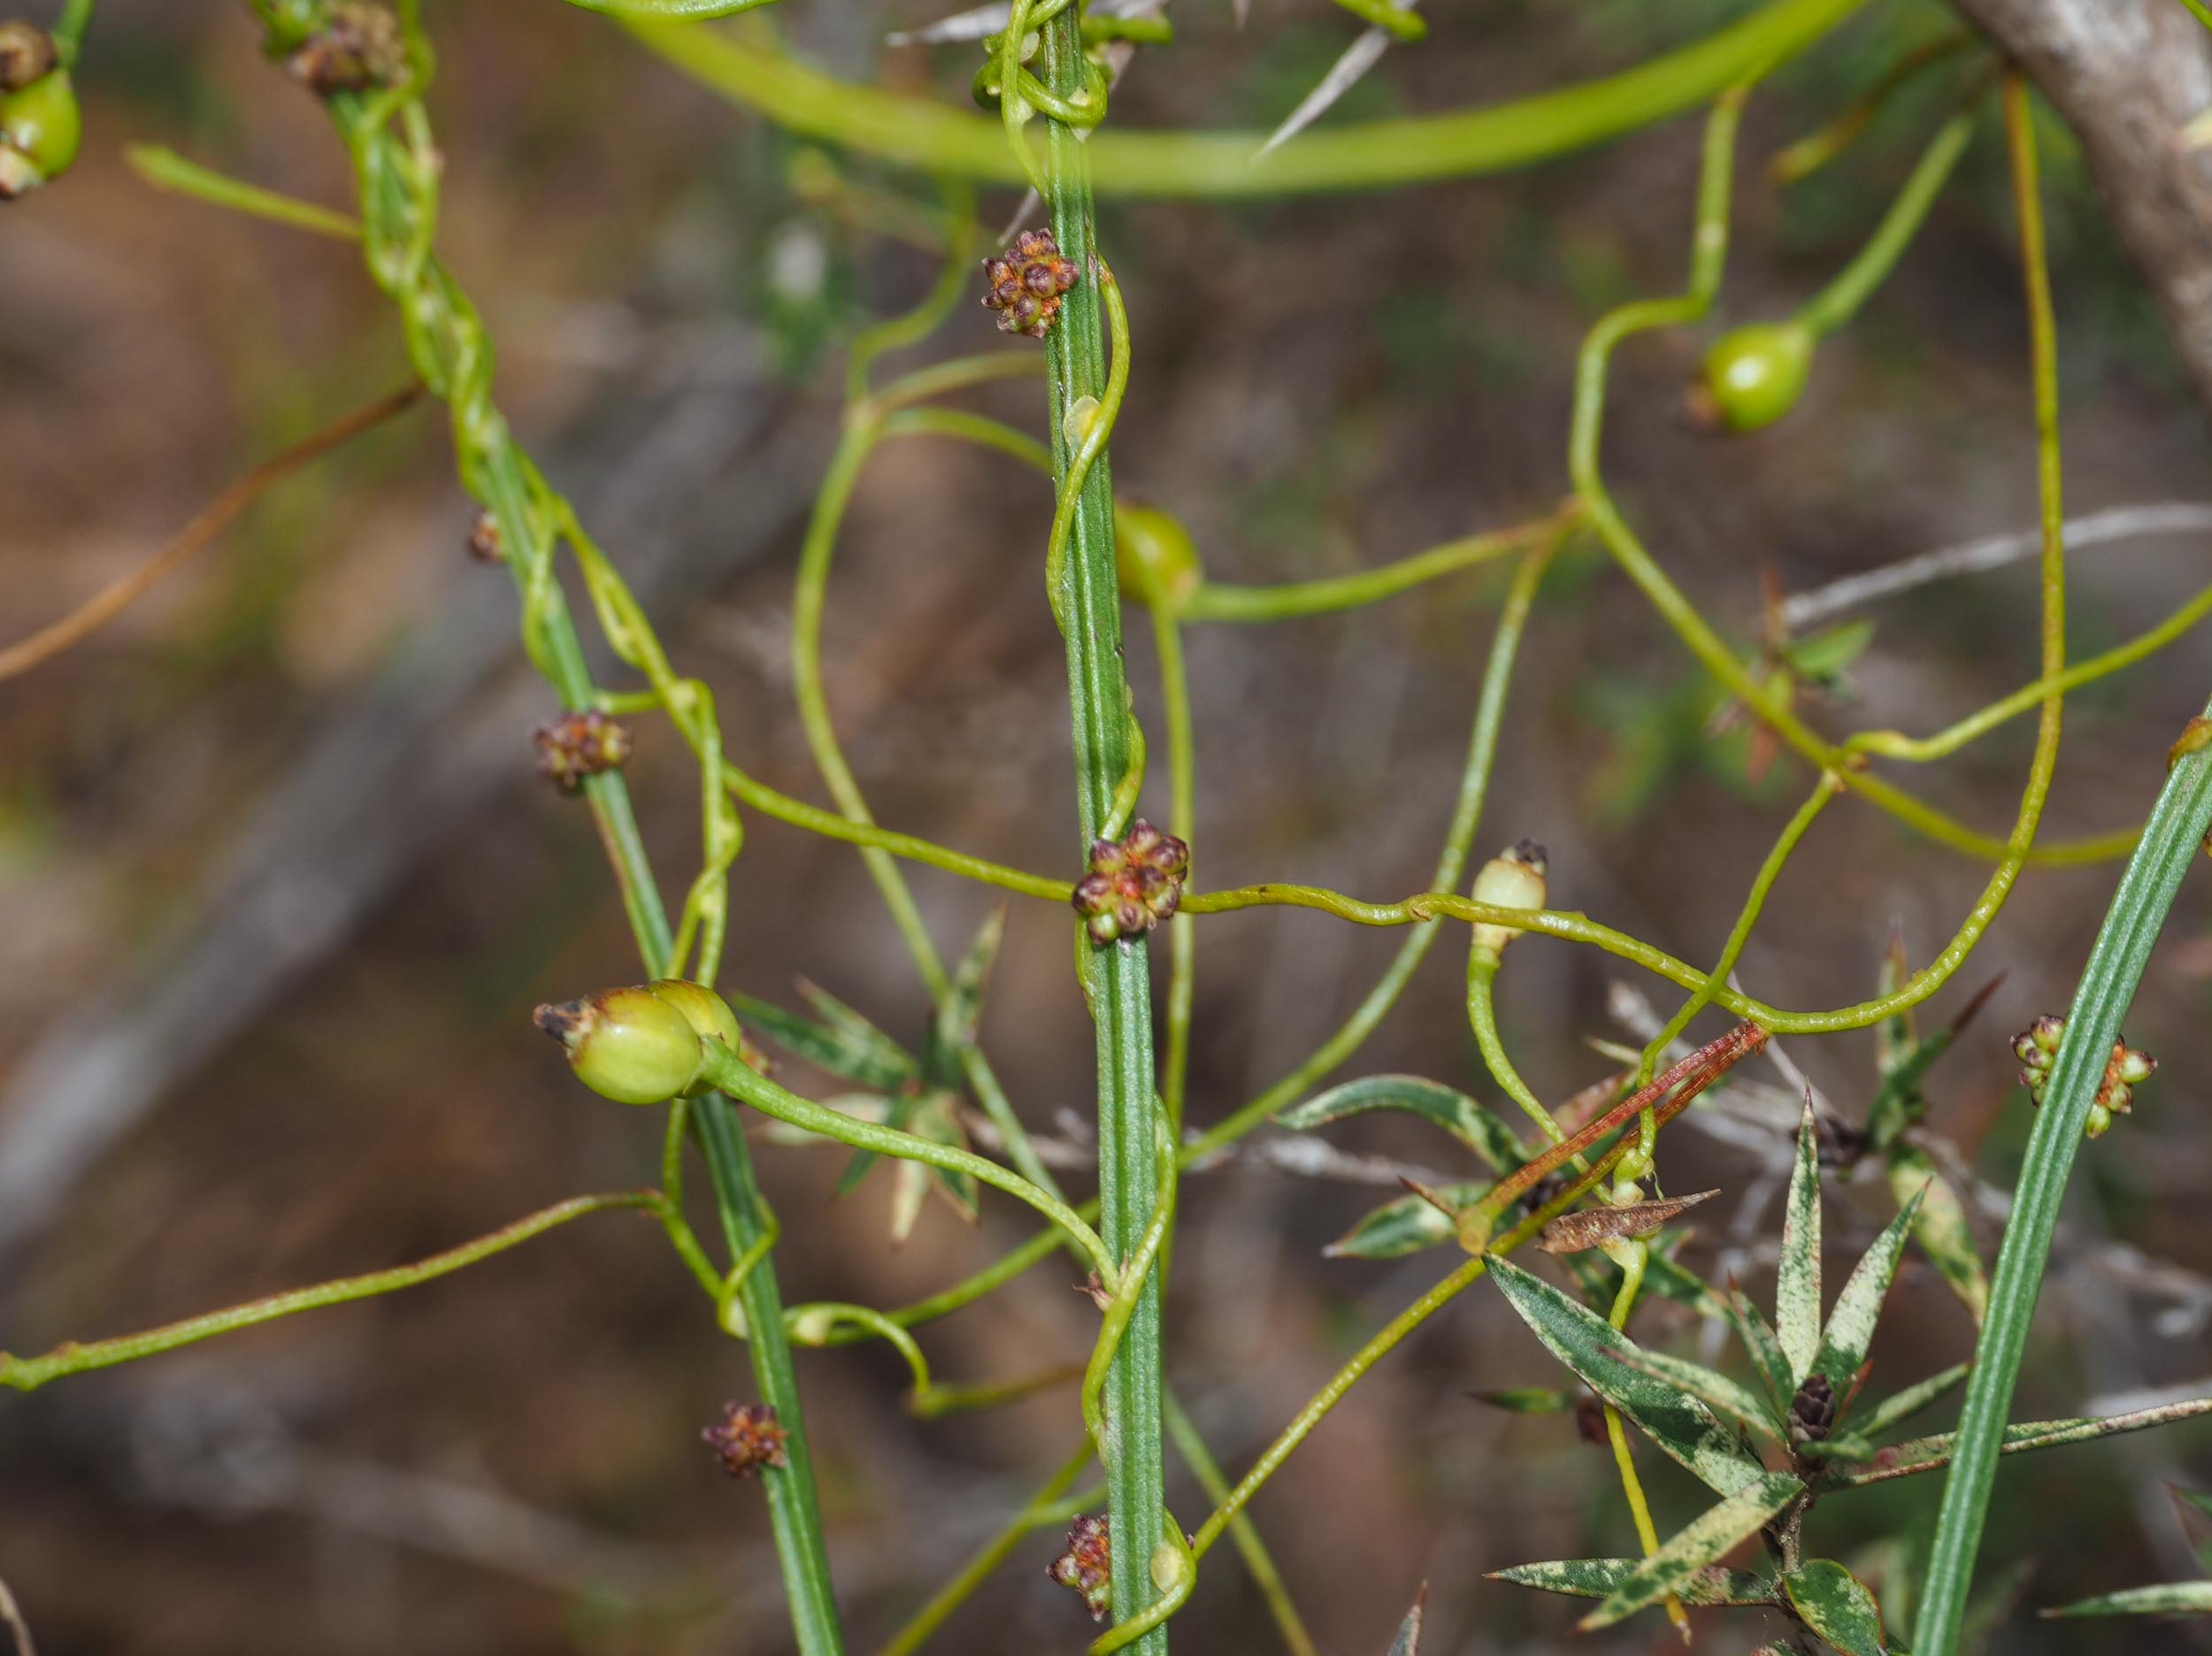  Typical growth habit of  Cassytha &nbsp;- twining around the stems of  Amperea xiphoclada , the Broom Spurge. 